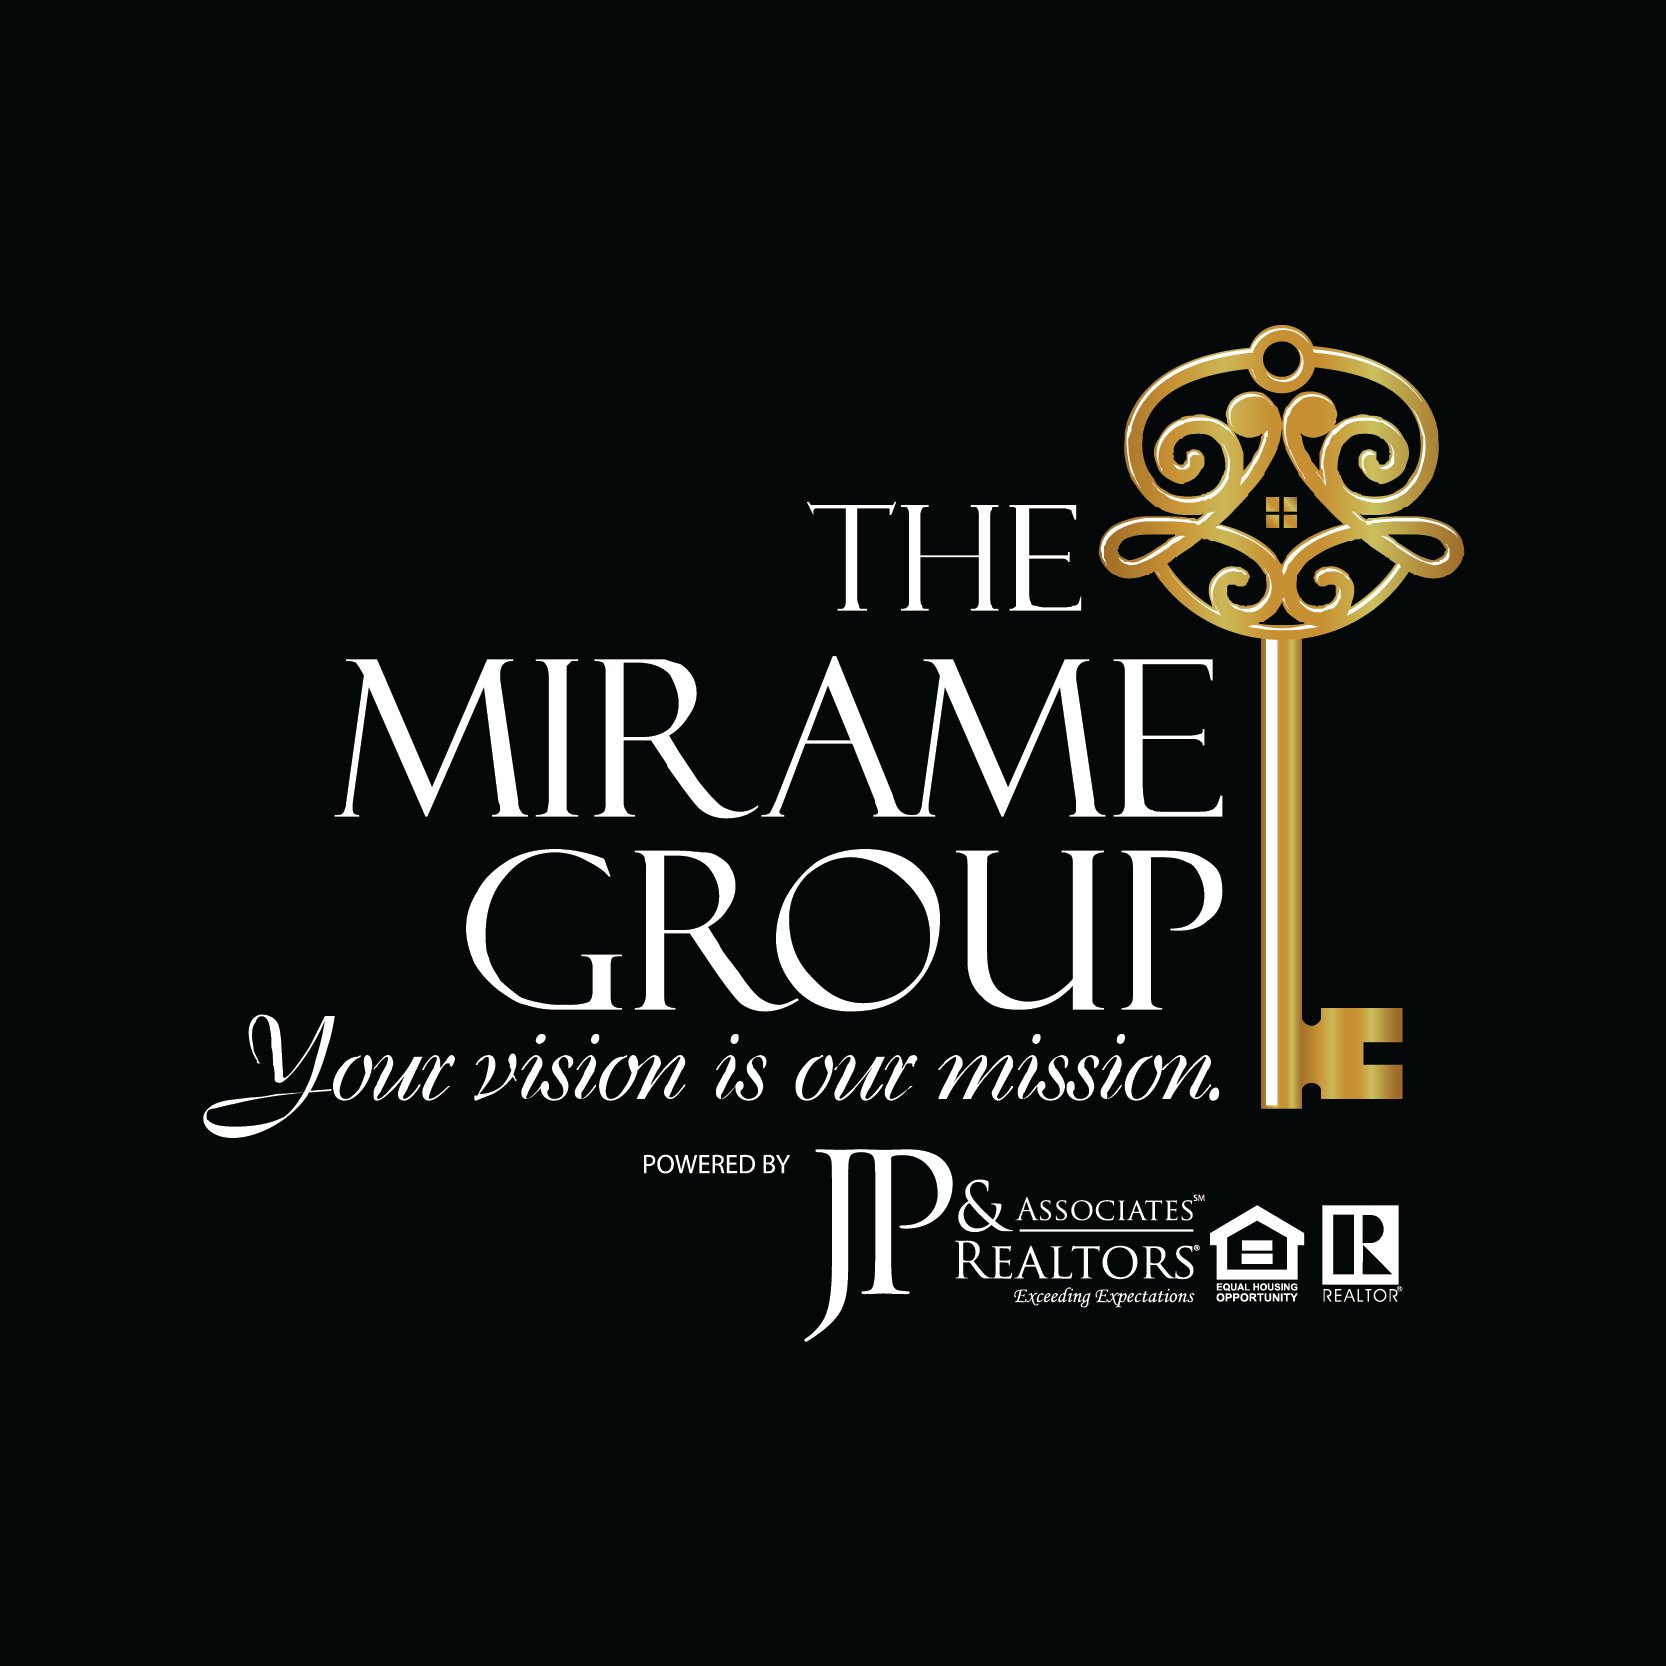 MariaChristina founded The Mirame Group, a full-service bi-lingual real estate services firm